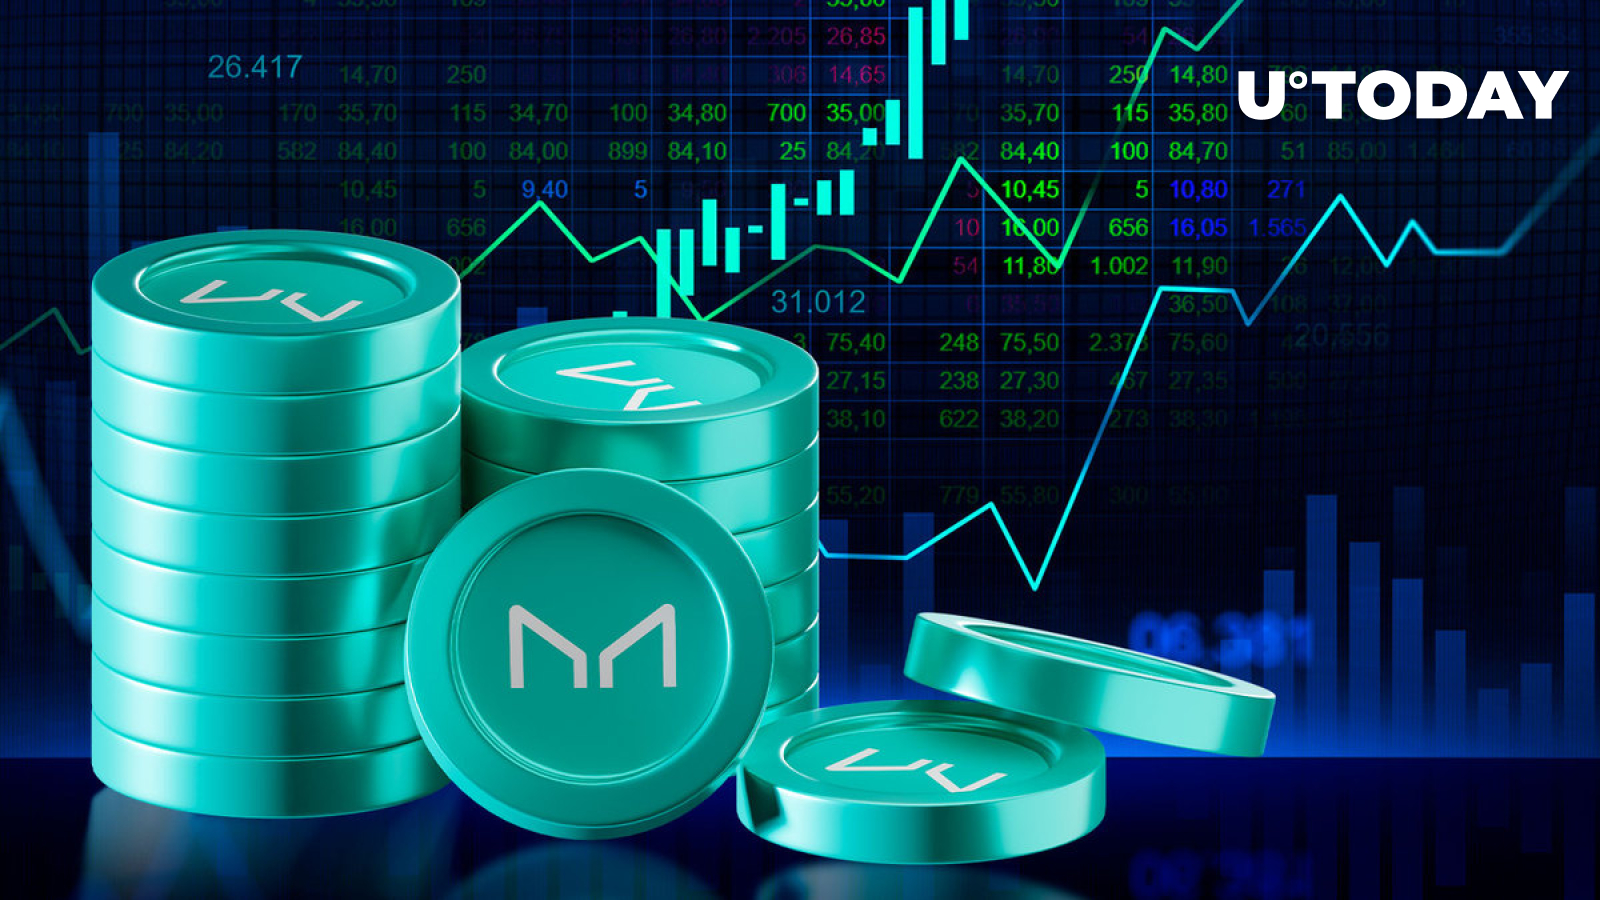 Maker (MKR) Addresses Hit 10-Week High, Here’s How Price Reacts